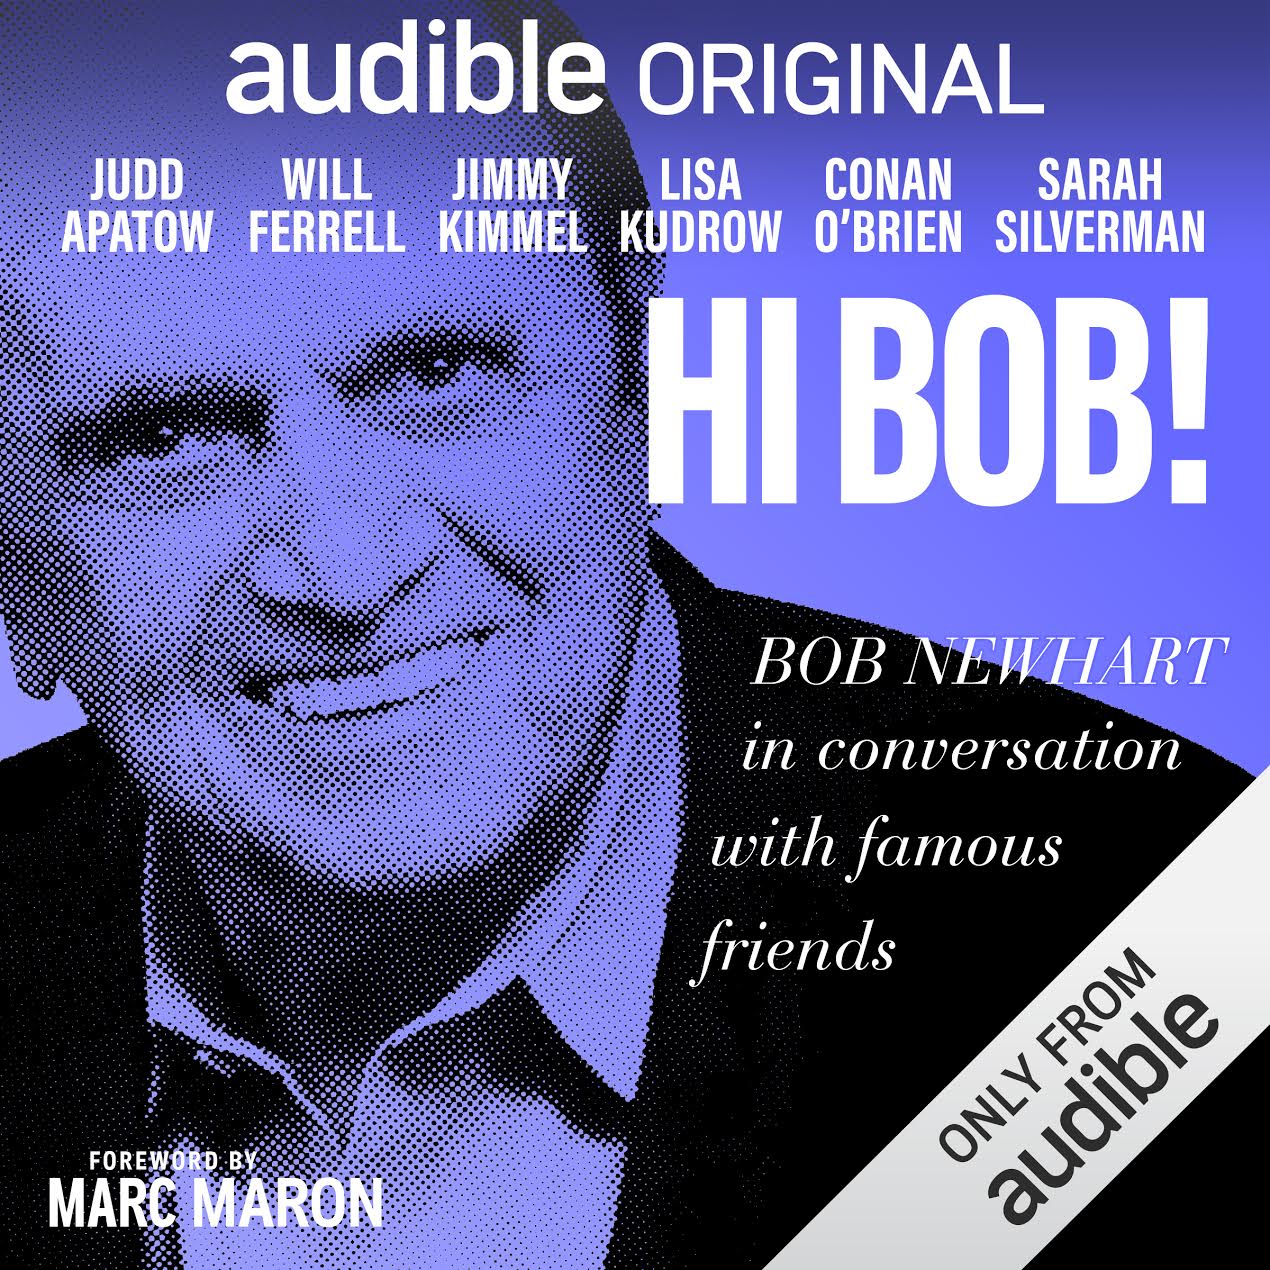 “Hi Bob!” Bob Newhart releases new podcast exclusively on Audible